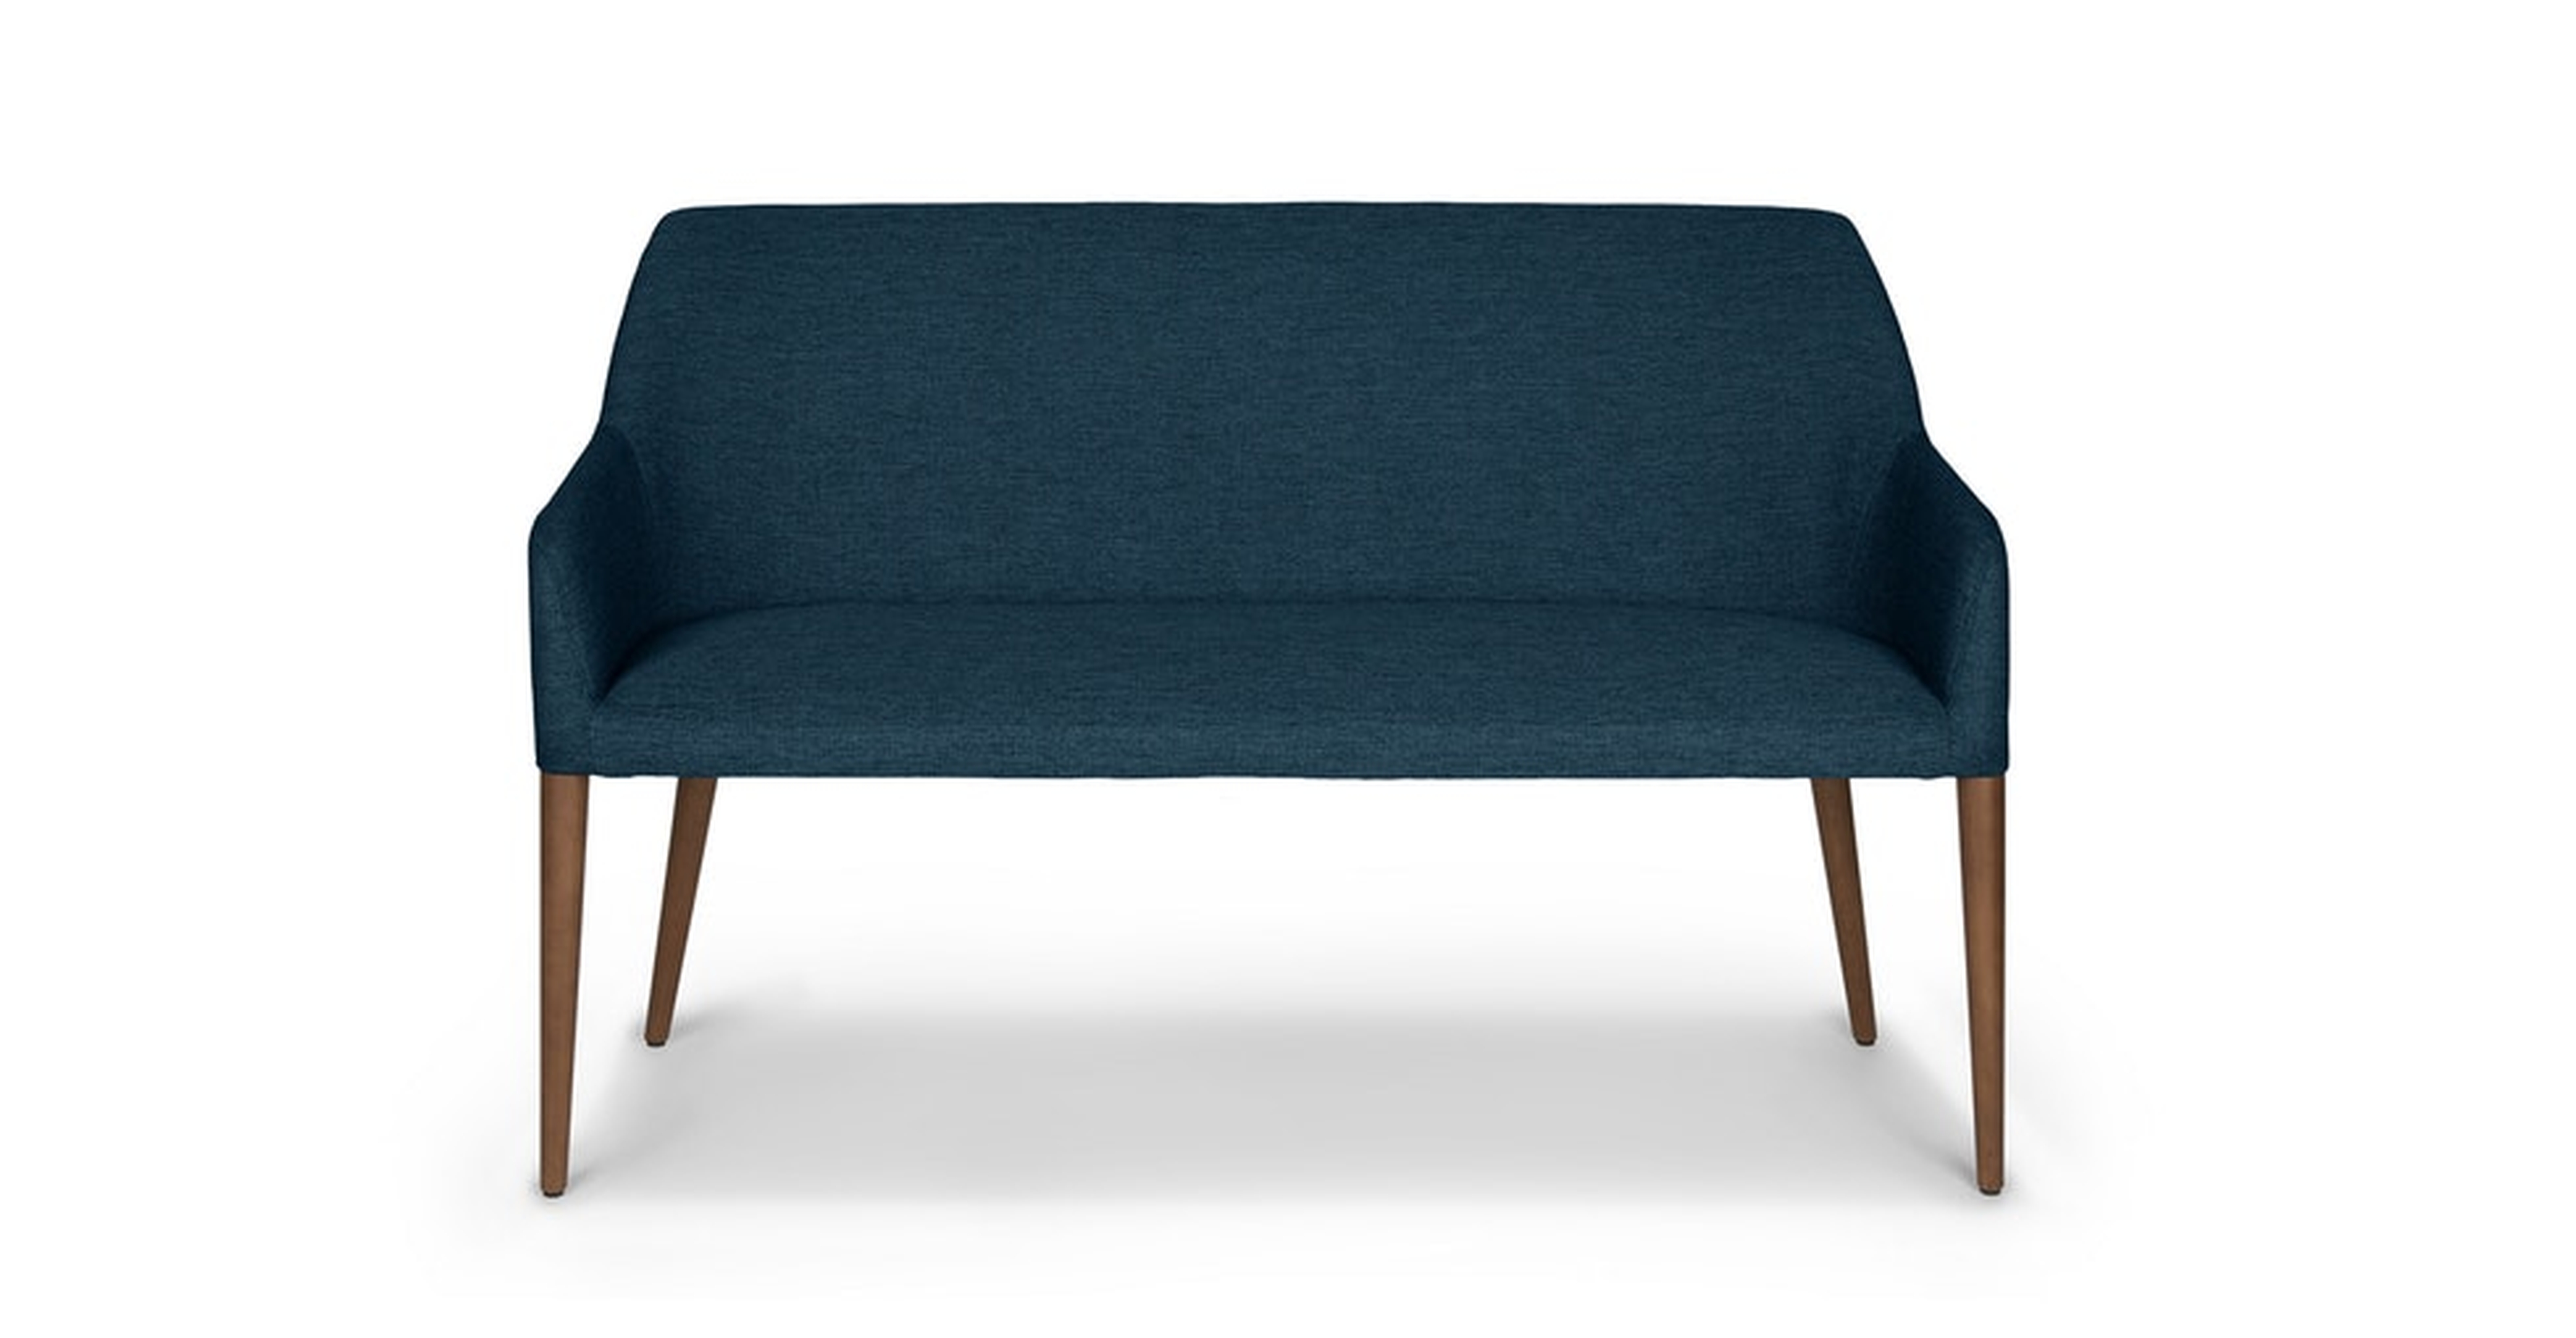 Feast Twilight Blue Dining Bench - Article